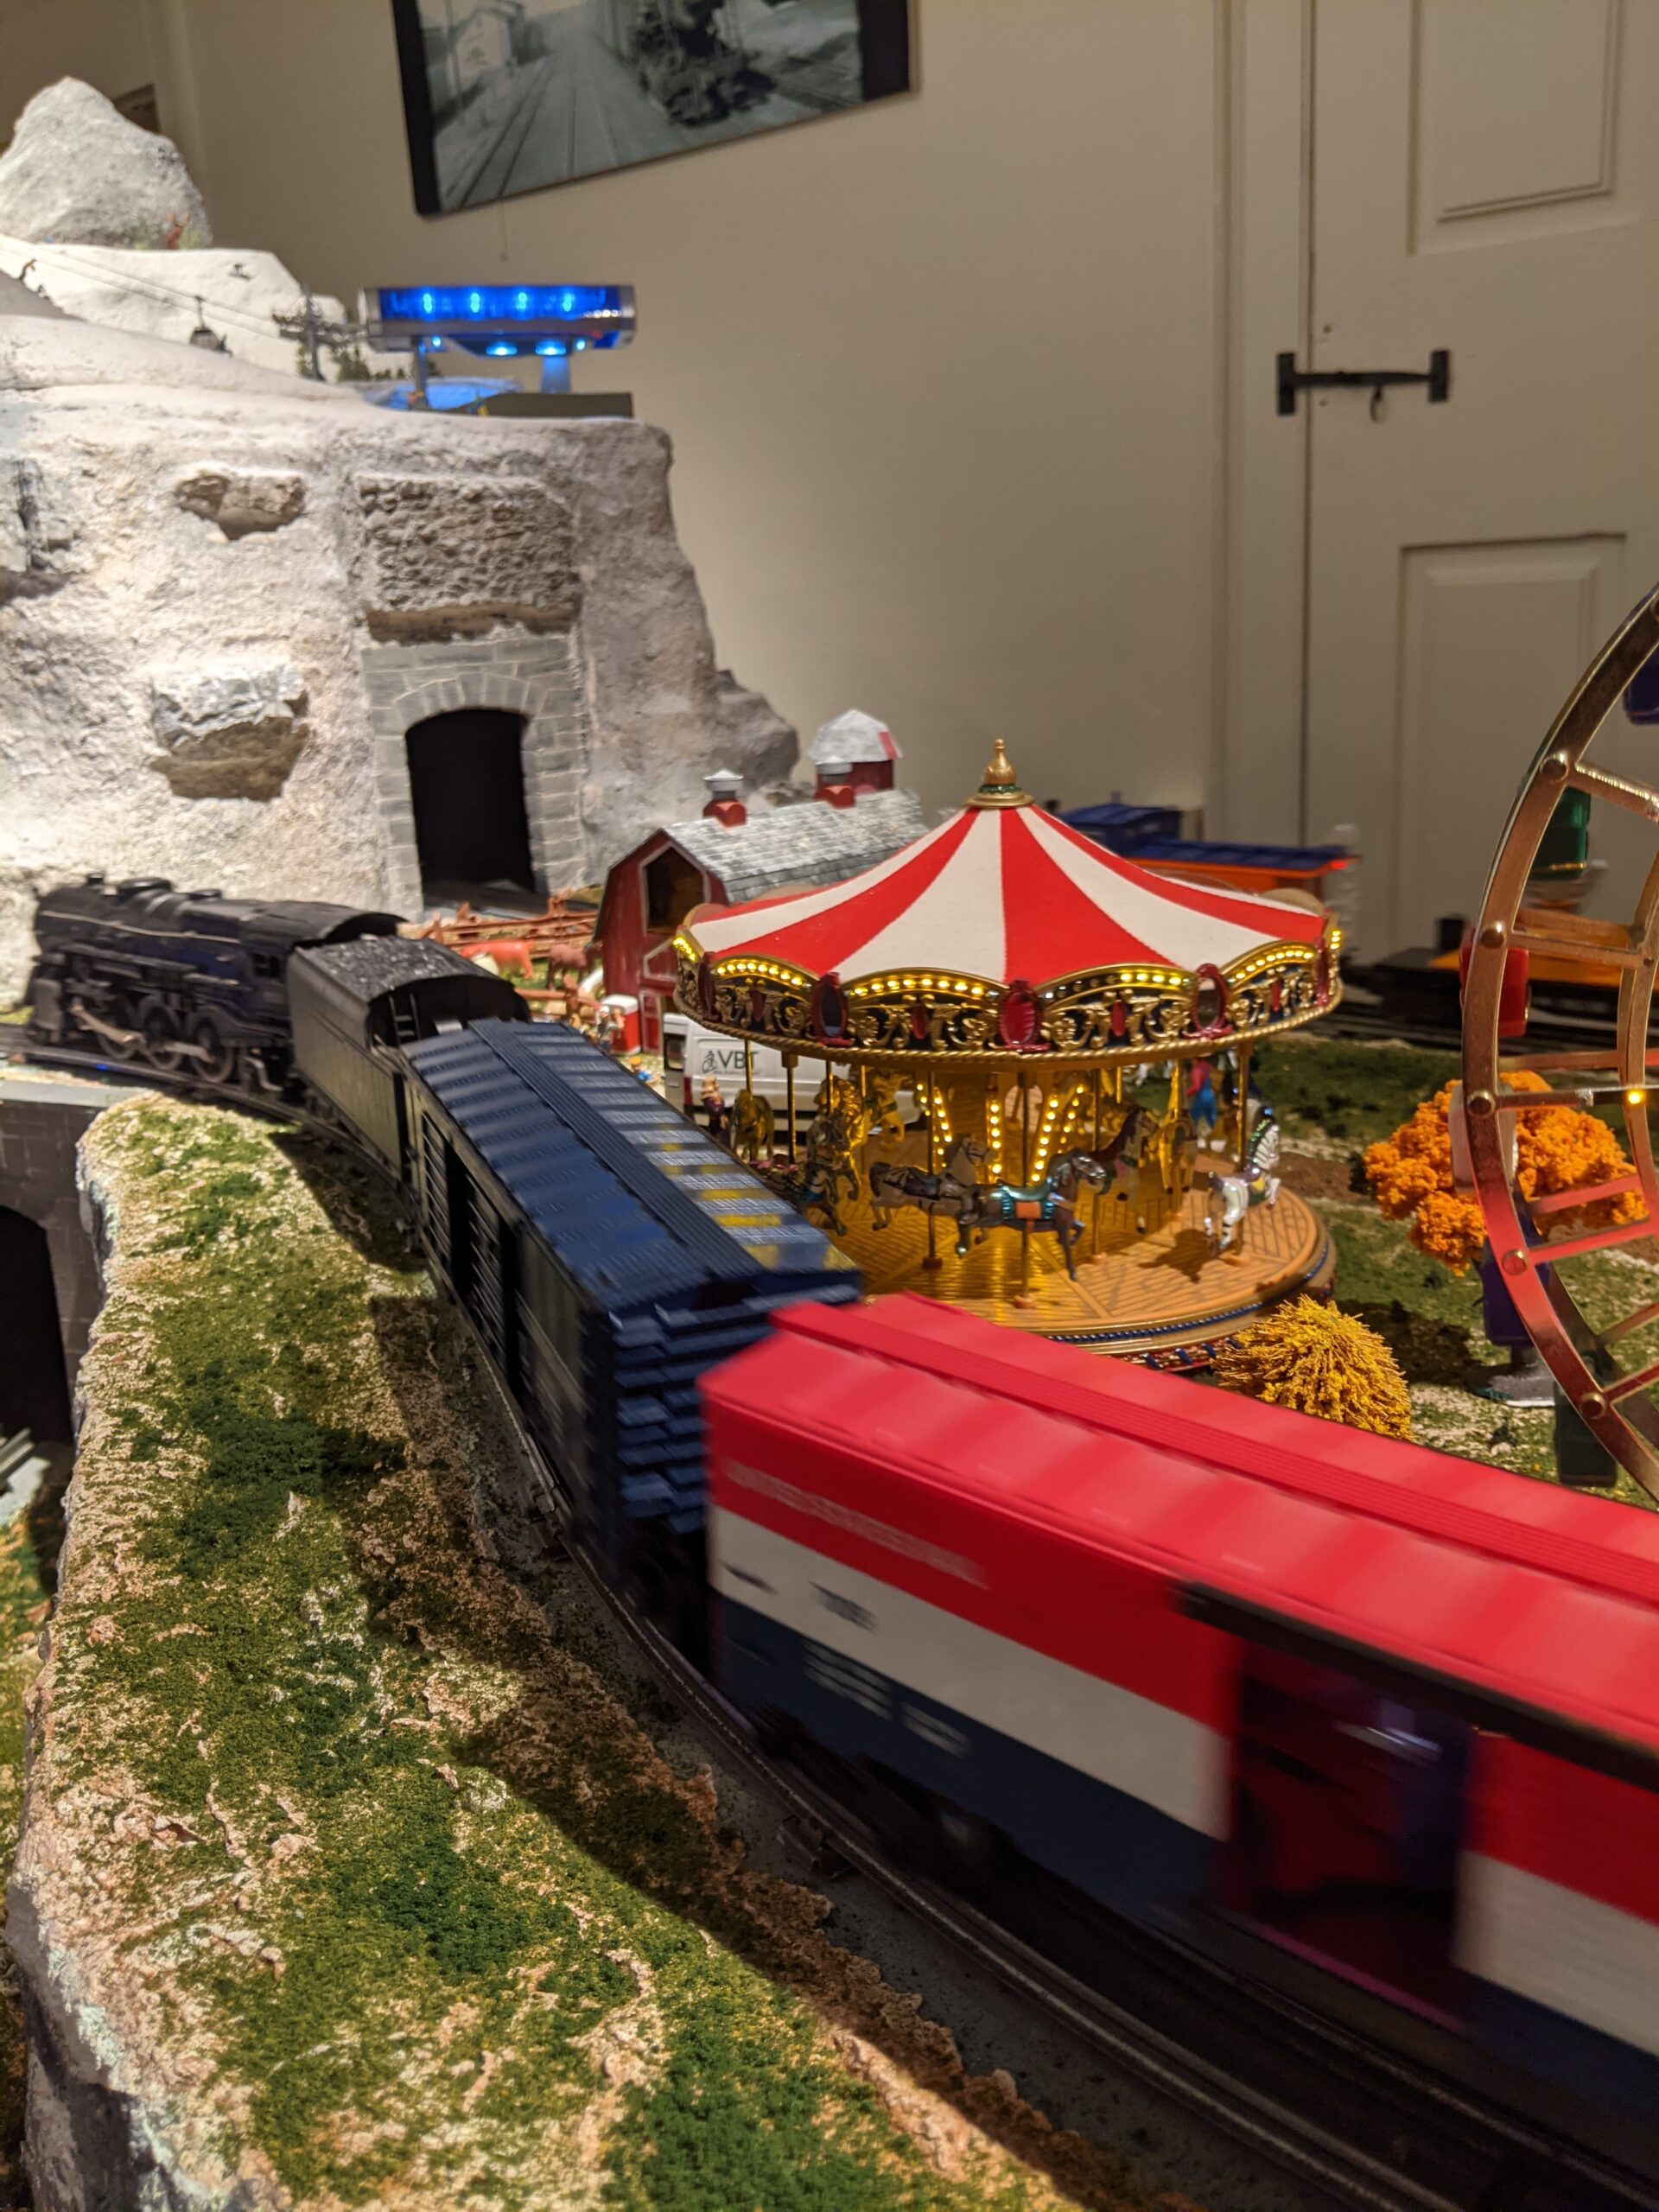 Time For The Sheldon Museum Trains